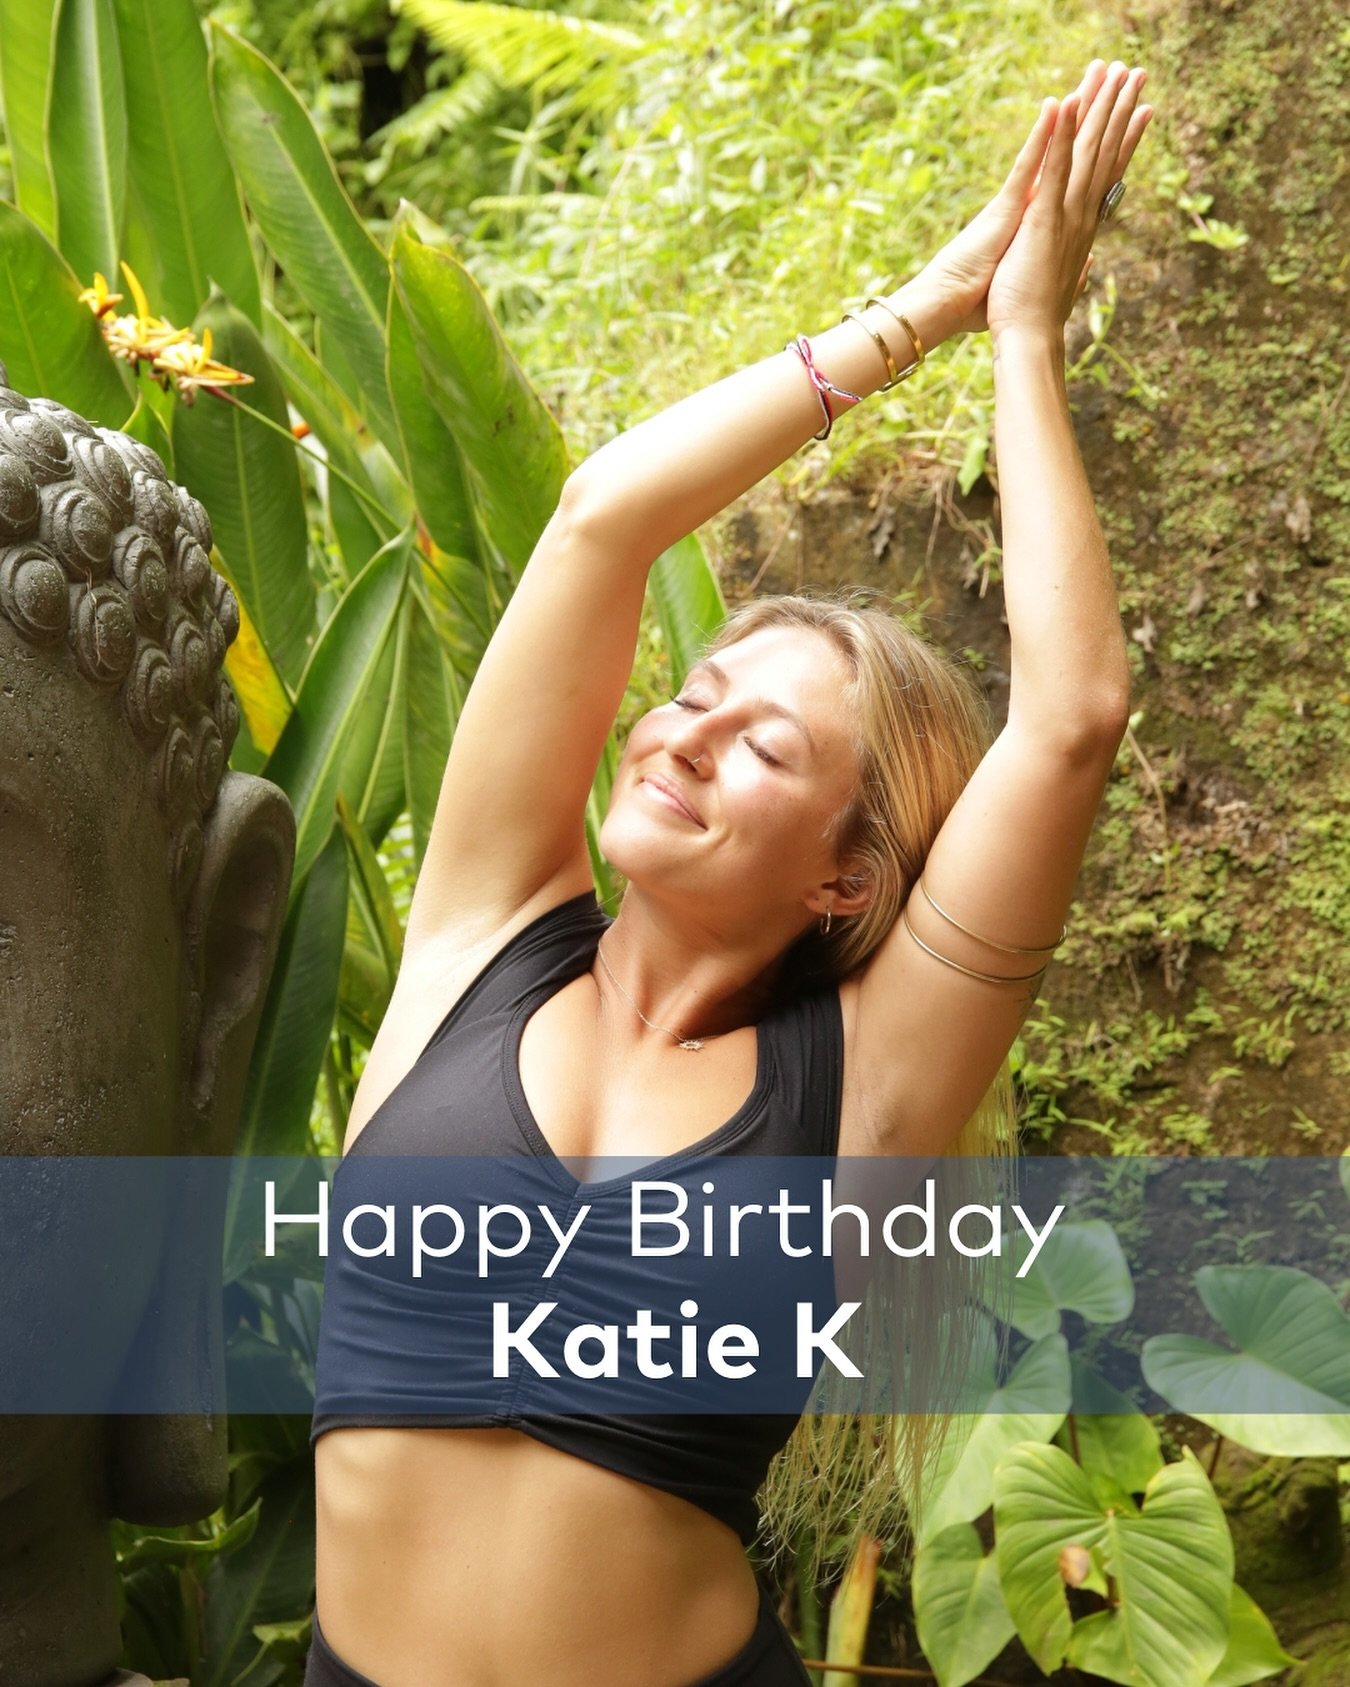 Happy birthday @katiekreidle !!!
Katie is warm, welcoming, caring and supportive. She has an adventures spirit, is down for anything, and is a &lsquo;ride or die&rsquo; kind of friend.

Three fun facts about Katie:
1. She has her own wellness busines